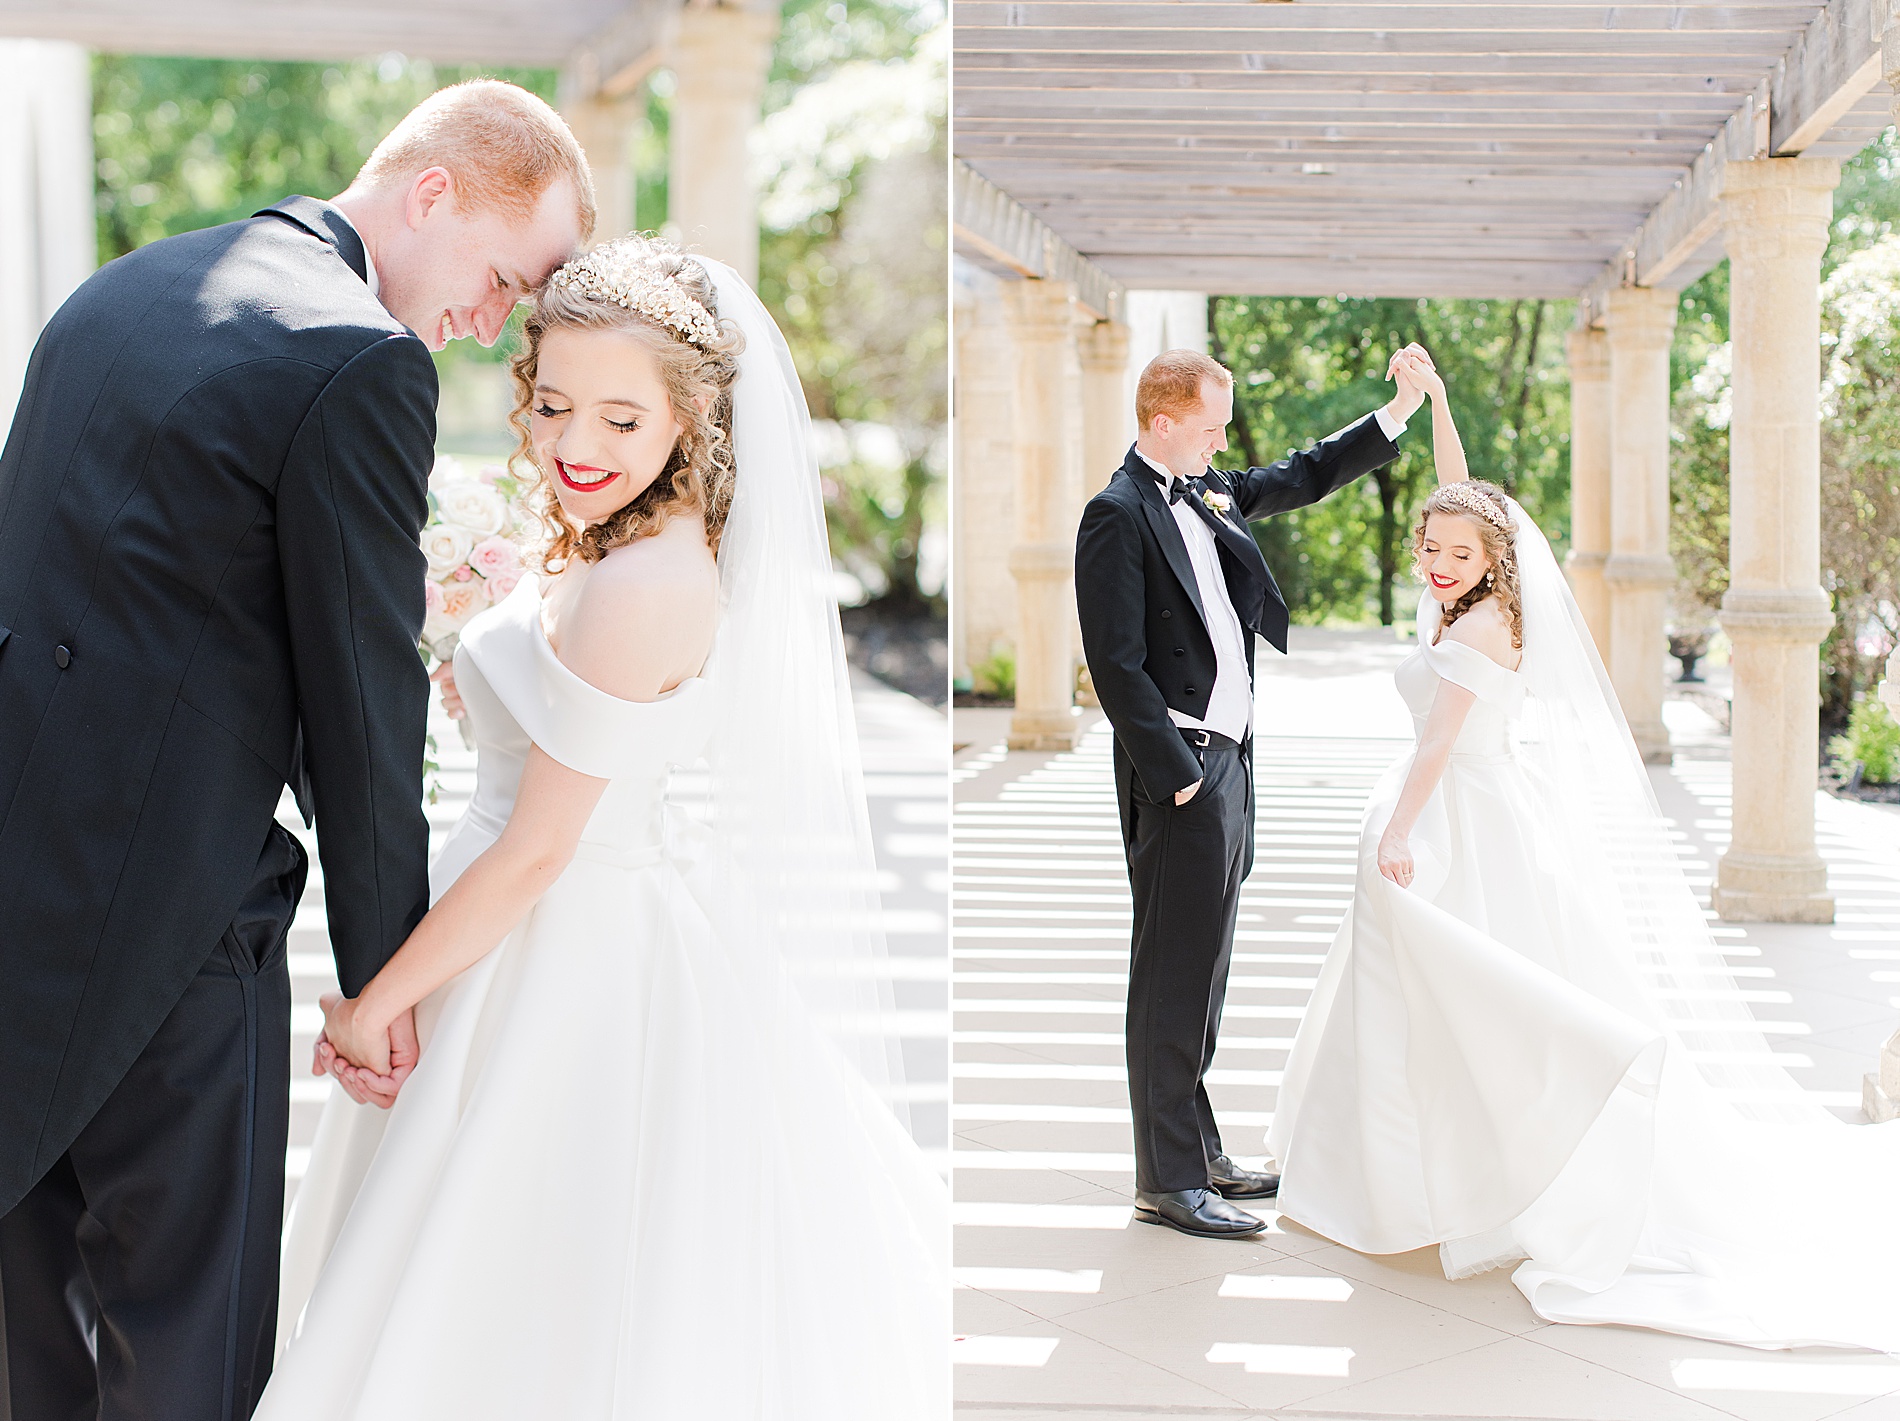 Our Love Story | Three Year Marriage Recap by a Greenville, SC Wedding Photographer